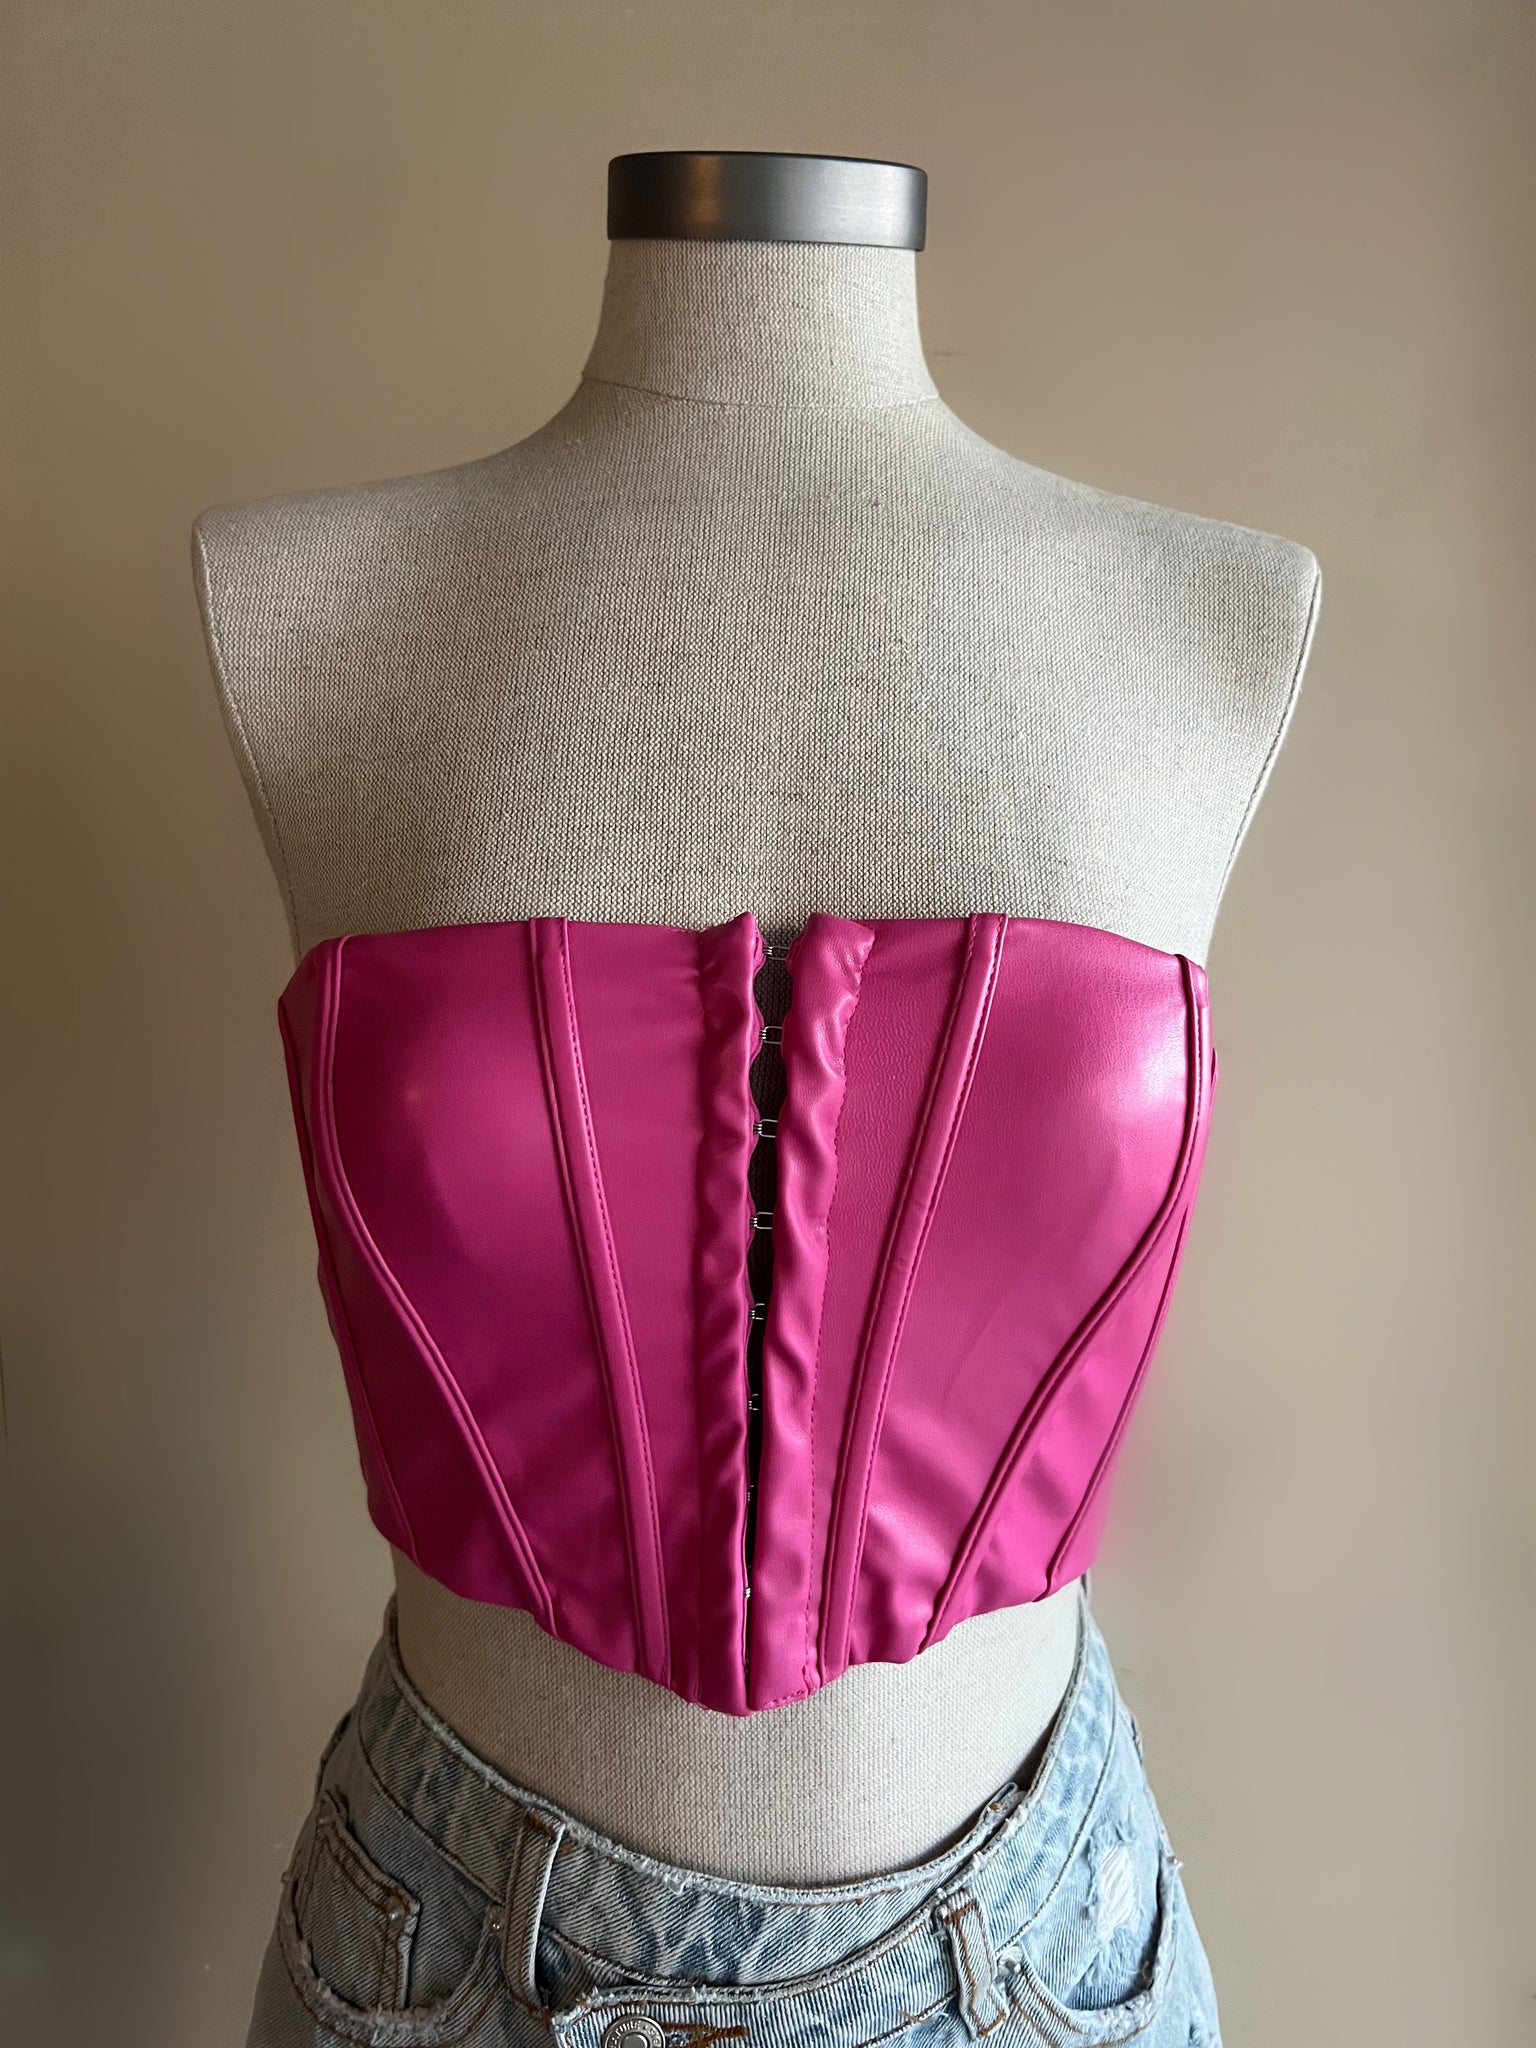 Pink leather corset top